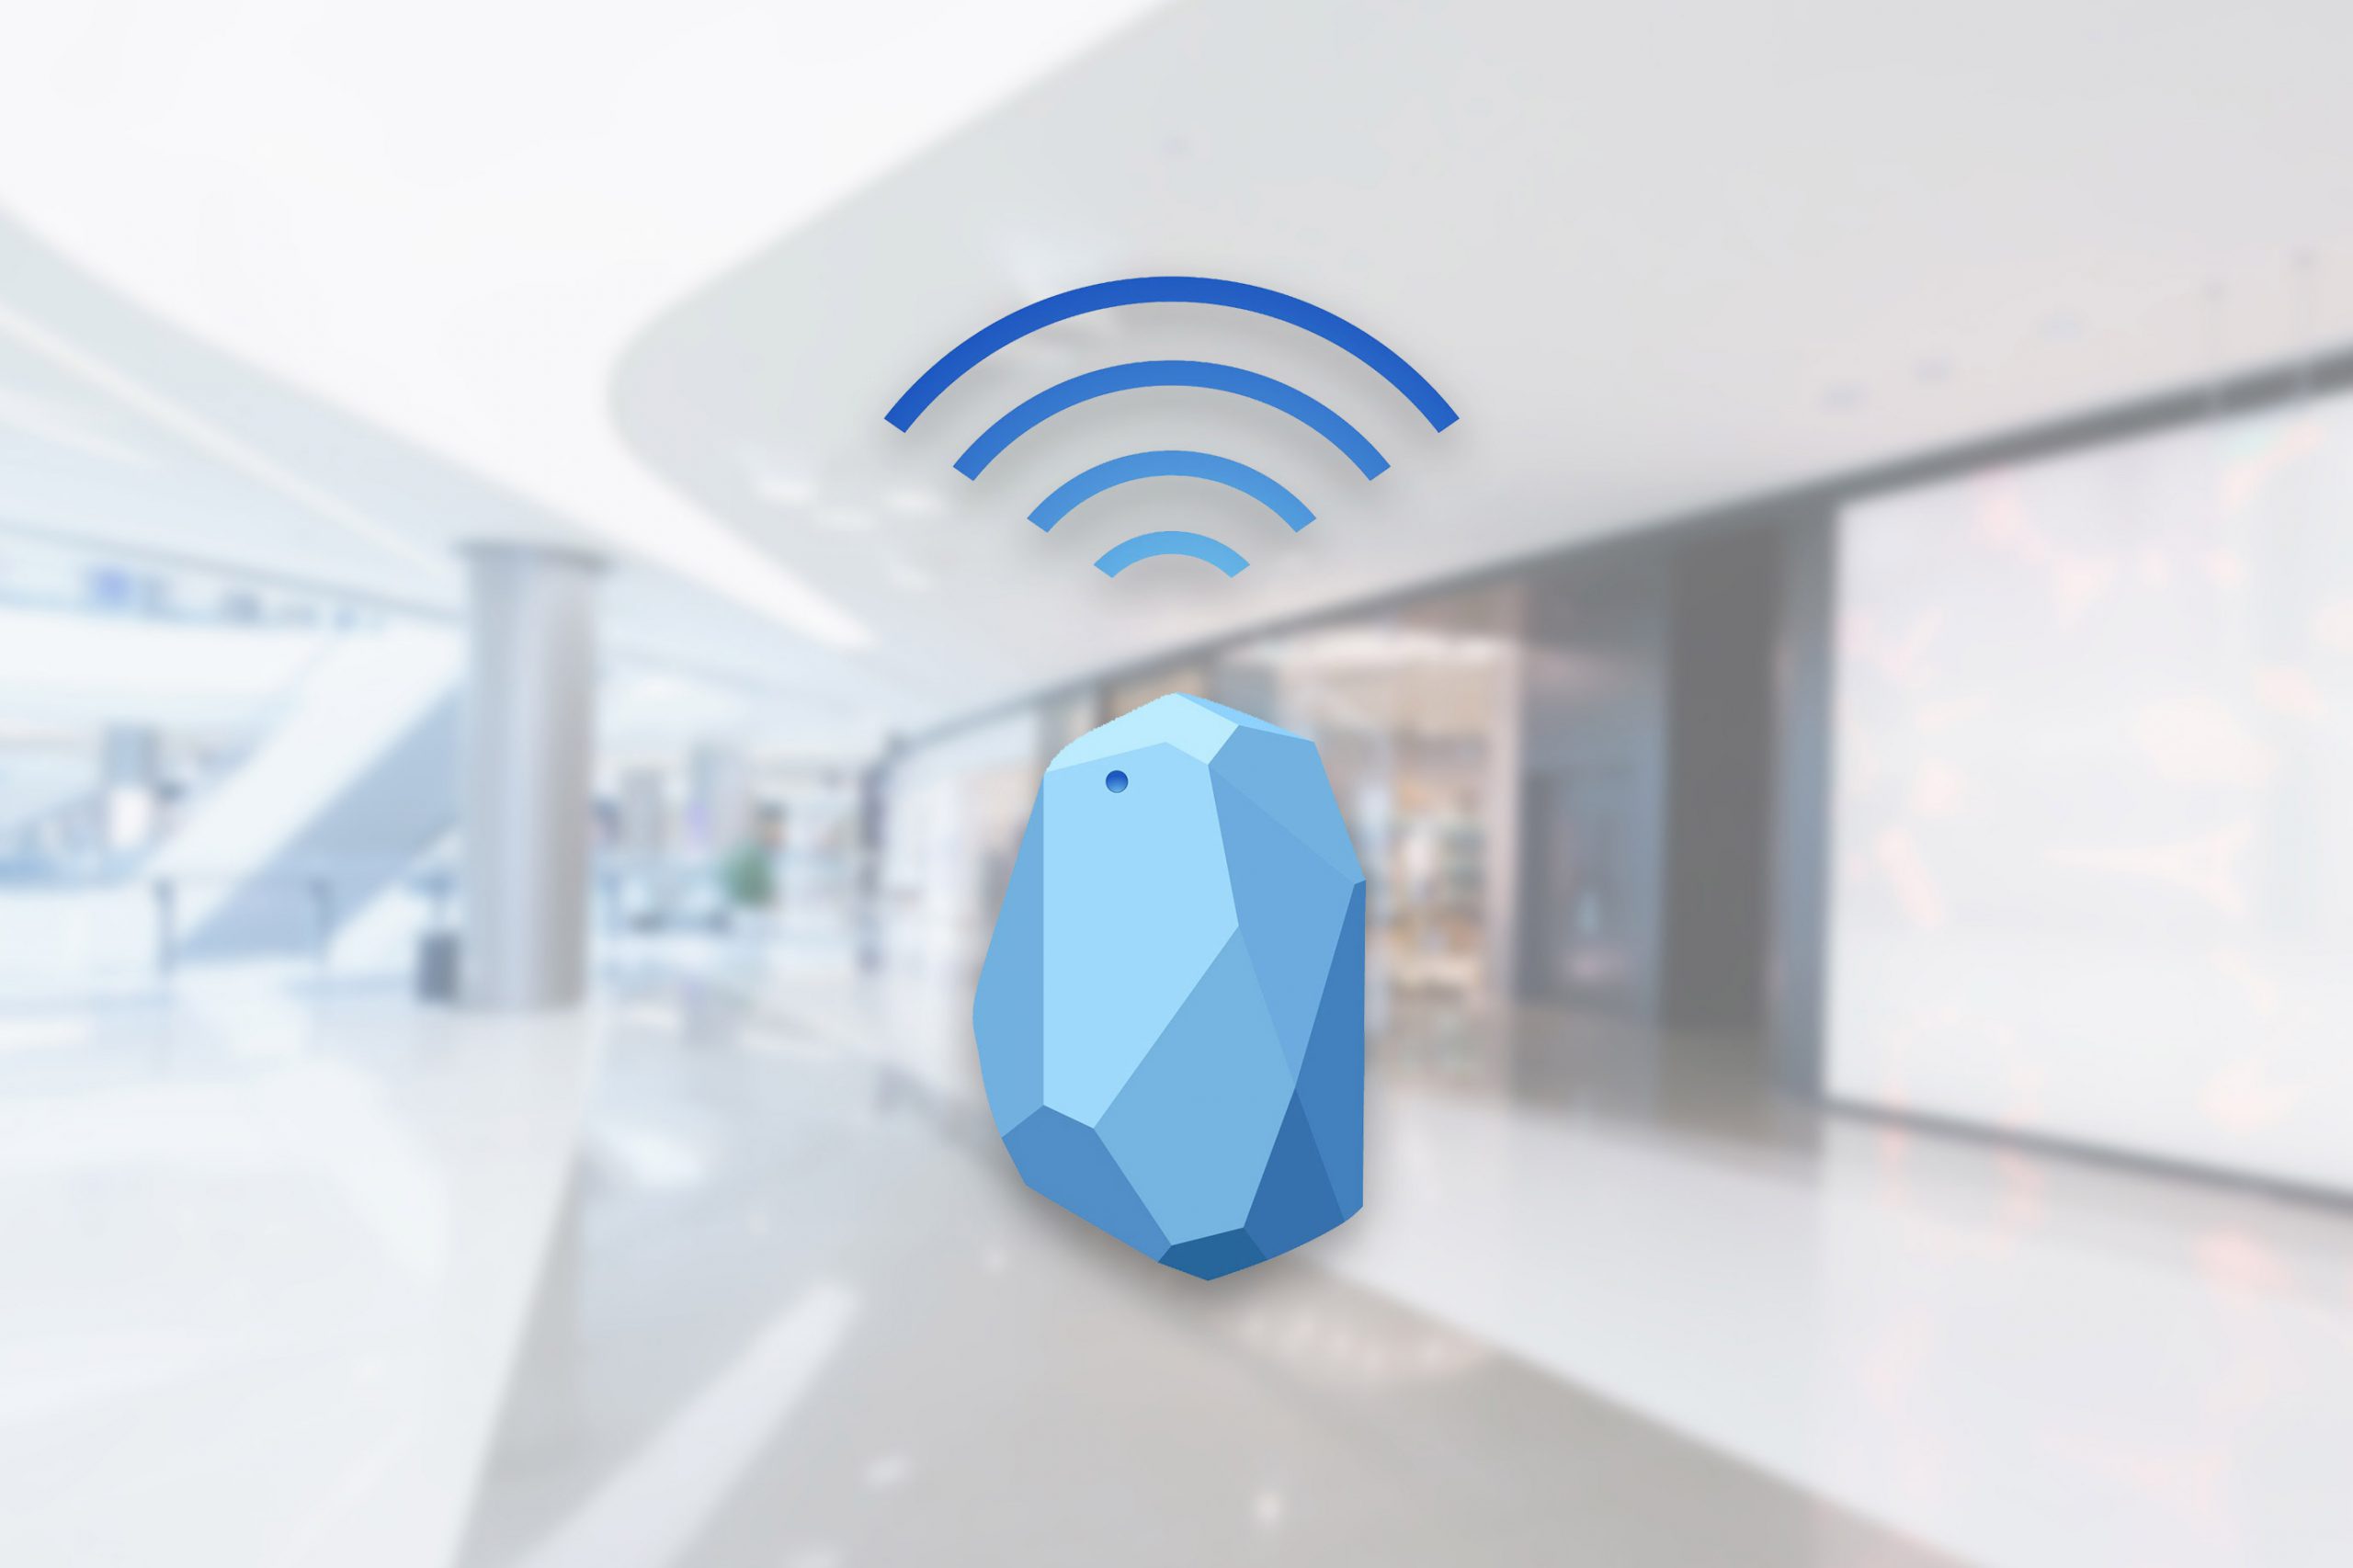 What You Must Know About Bluetooth Beacons Before Purchasing